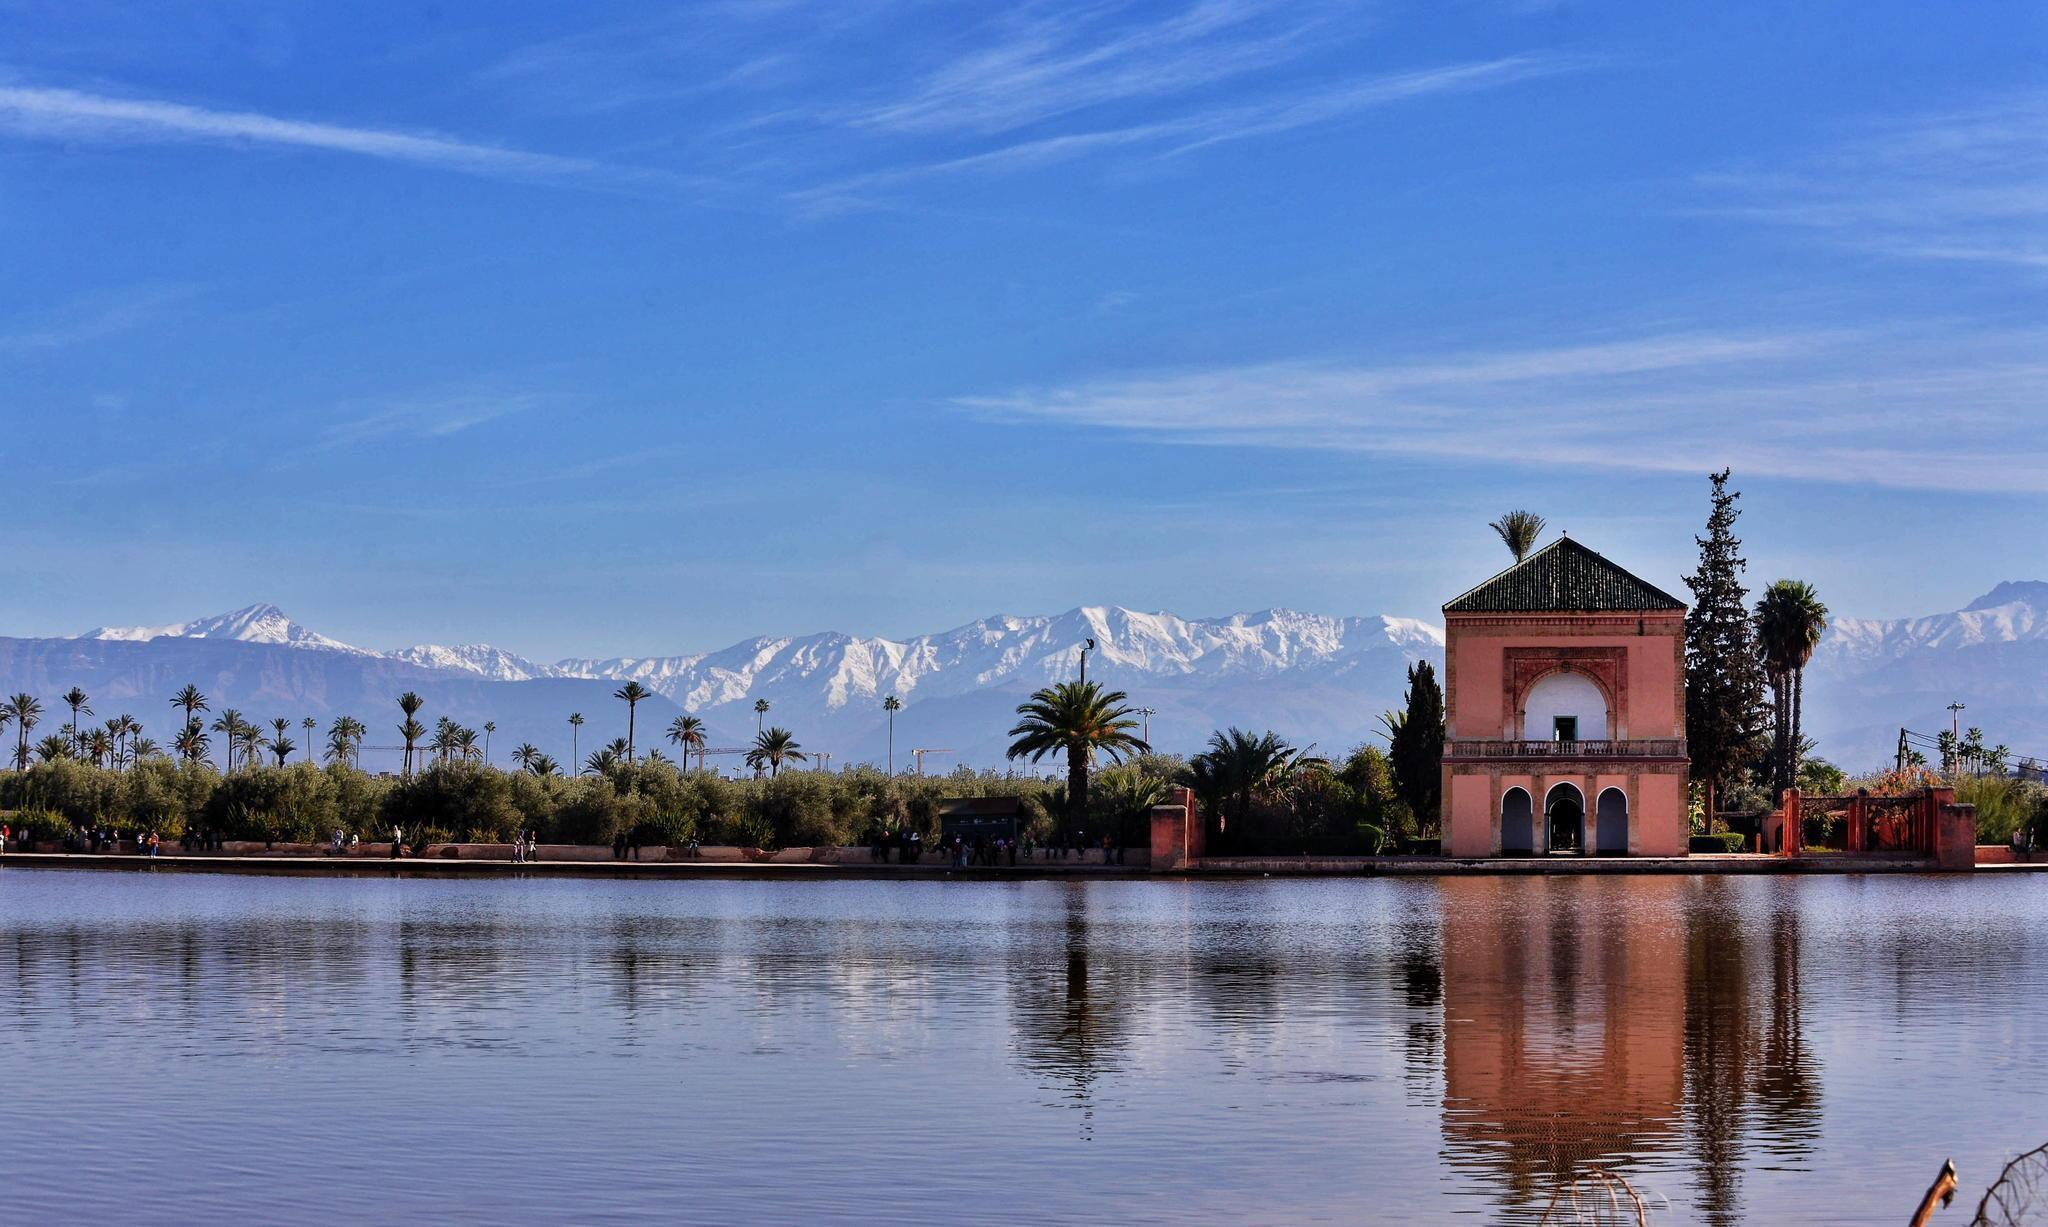 Marrakech Wallpaper Image Photo Picture Background